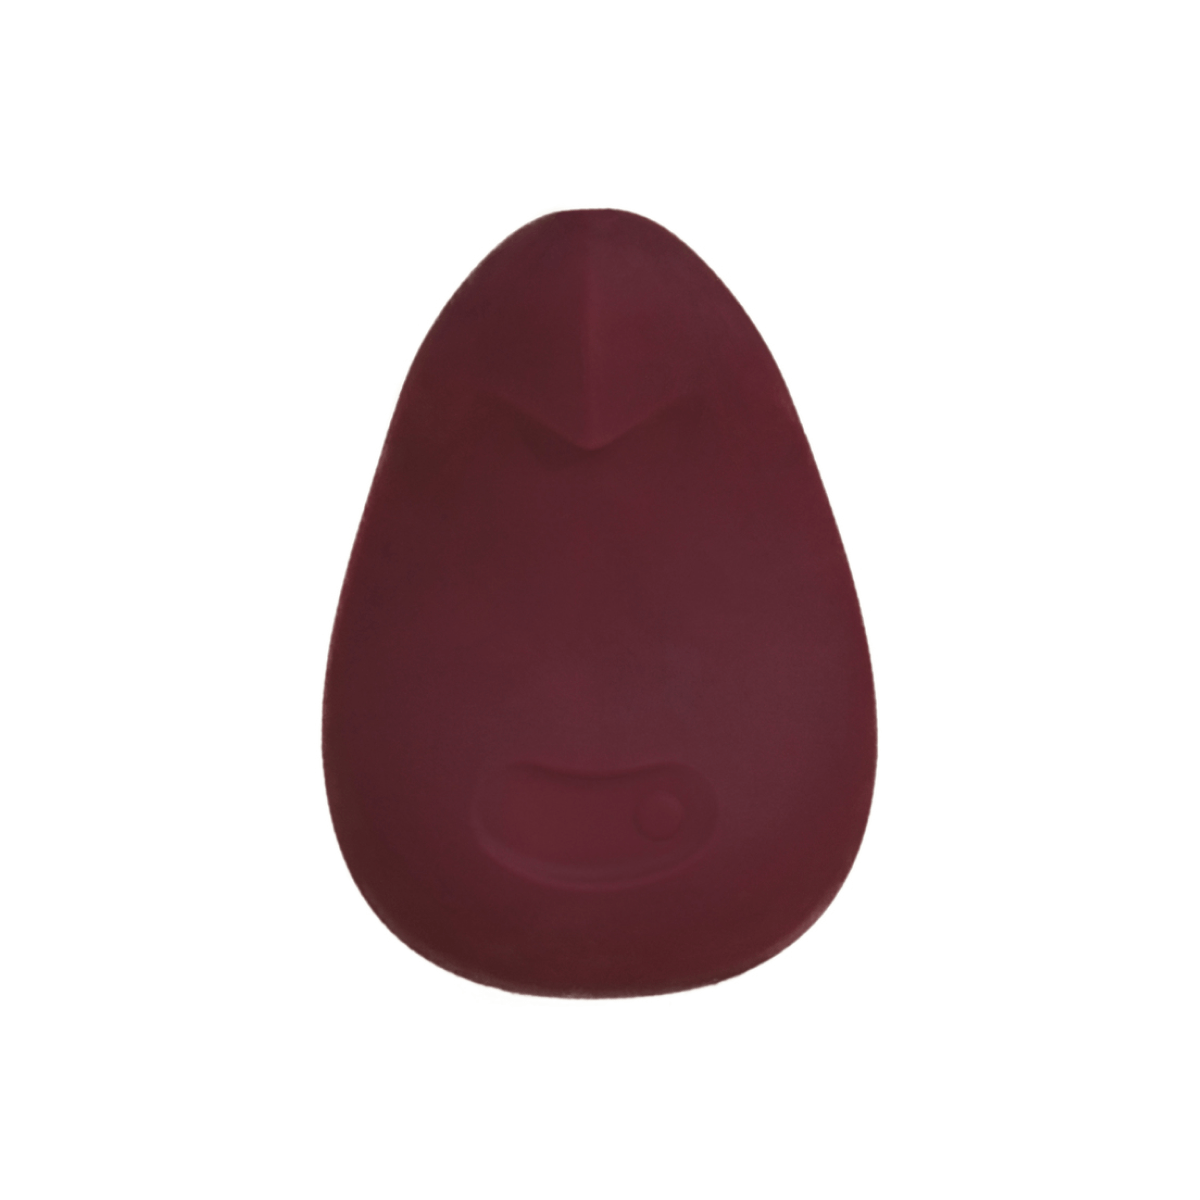 Dame Products Vibrator